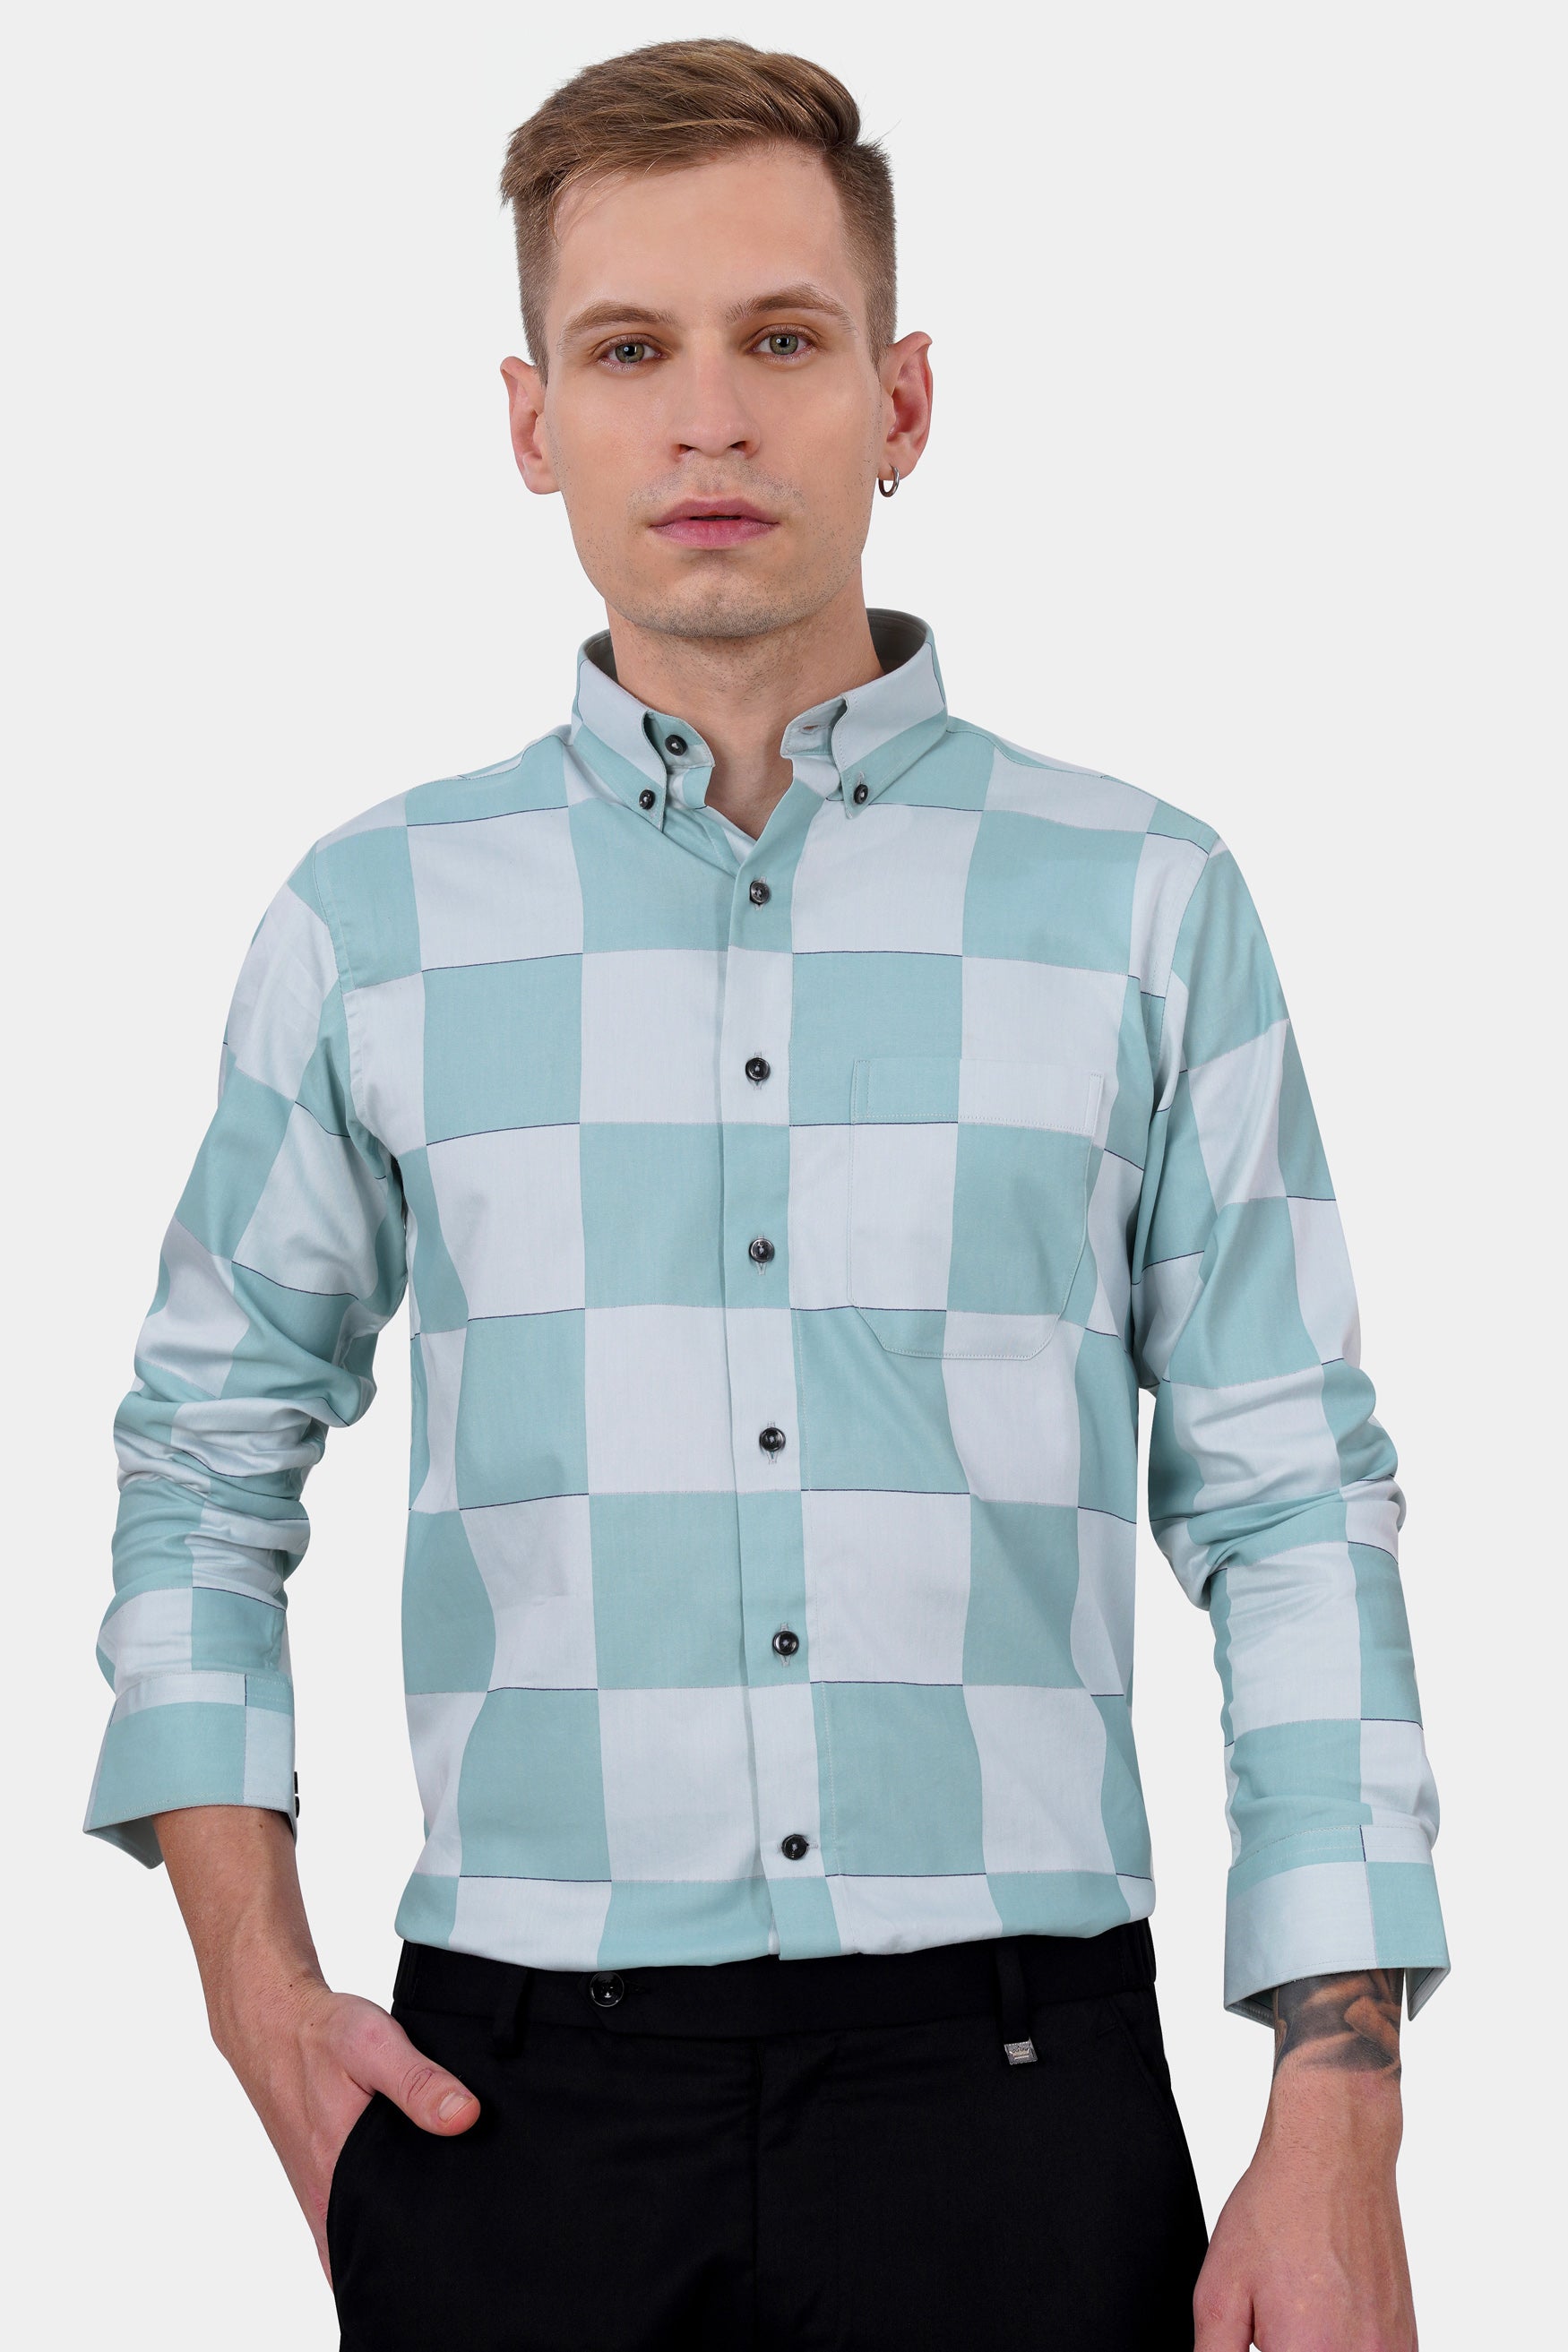 Gull Blue and Ghost Gray Checked Subtle Sheen Super Soft Premium Cotton Shirt 11749-BD-BLK-38, 11749-BD-BLK-H-38, 11749-BD-BLK-39, 11749-BD-BLK-H-39, 11749-BD-BLK-40, 11749-BD-BLK-H-40, 11749-BD-BLK-42, 11749-BD-BLK-H-42, 11749-BD-BLK-44, 11749-BD-BLK-H-44, 11749-BD-BLK-46, 11749-BD-BLK-H-46, 11749-BD-BLK-48, 11749-BD-BLK-H-48, 11749-BD-BLK-50, 11749-BD-BLK-H-50, 11749-BD-BLK-52, 11749-BD-BLK-H-52